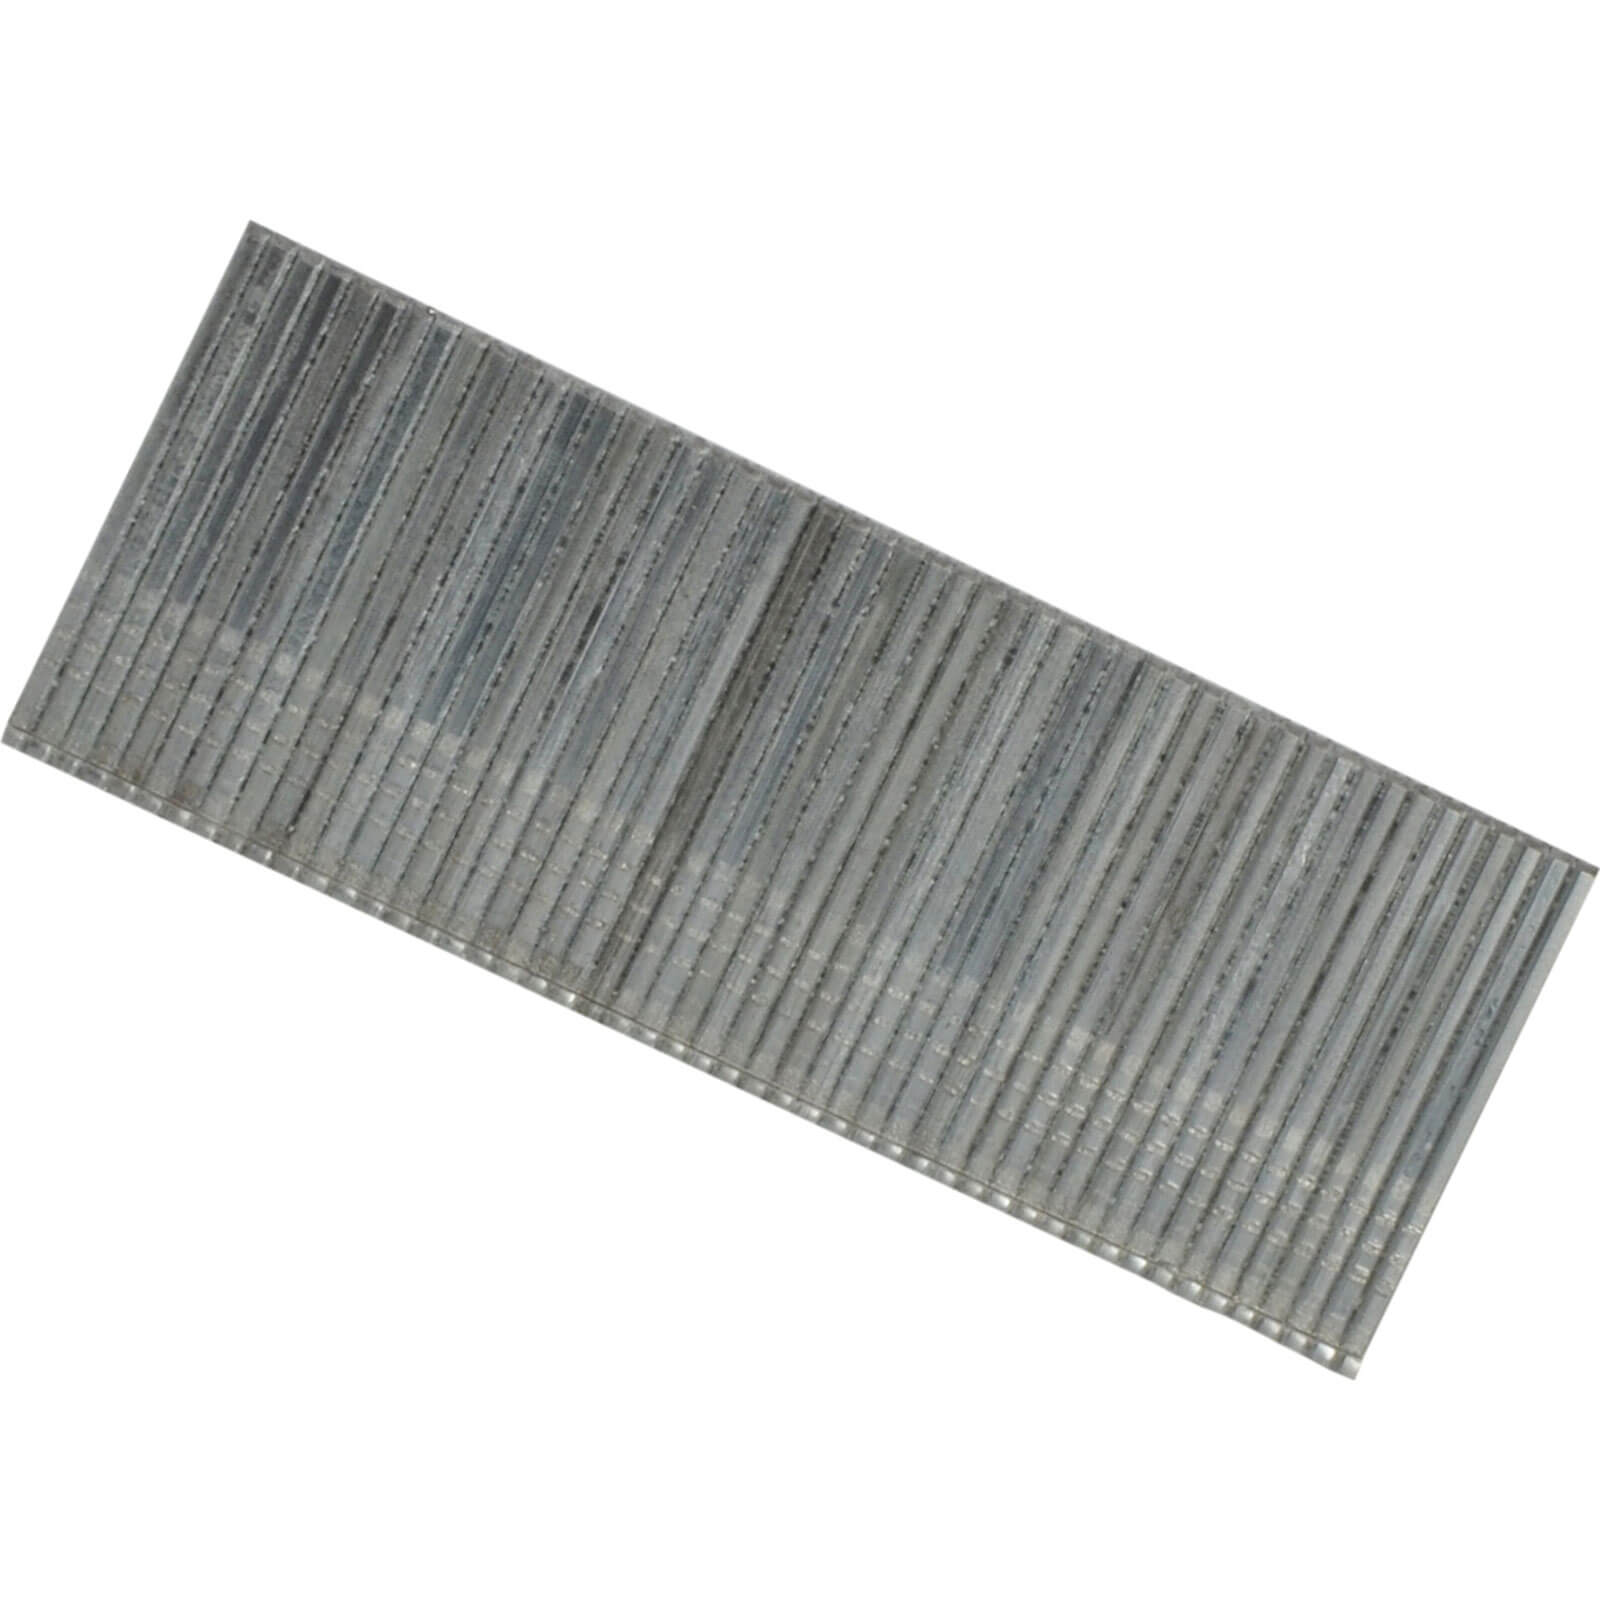 Photo of Bostitch 16 Gauge Straight Finish Nails 44mm Pack Of 1000